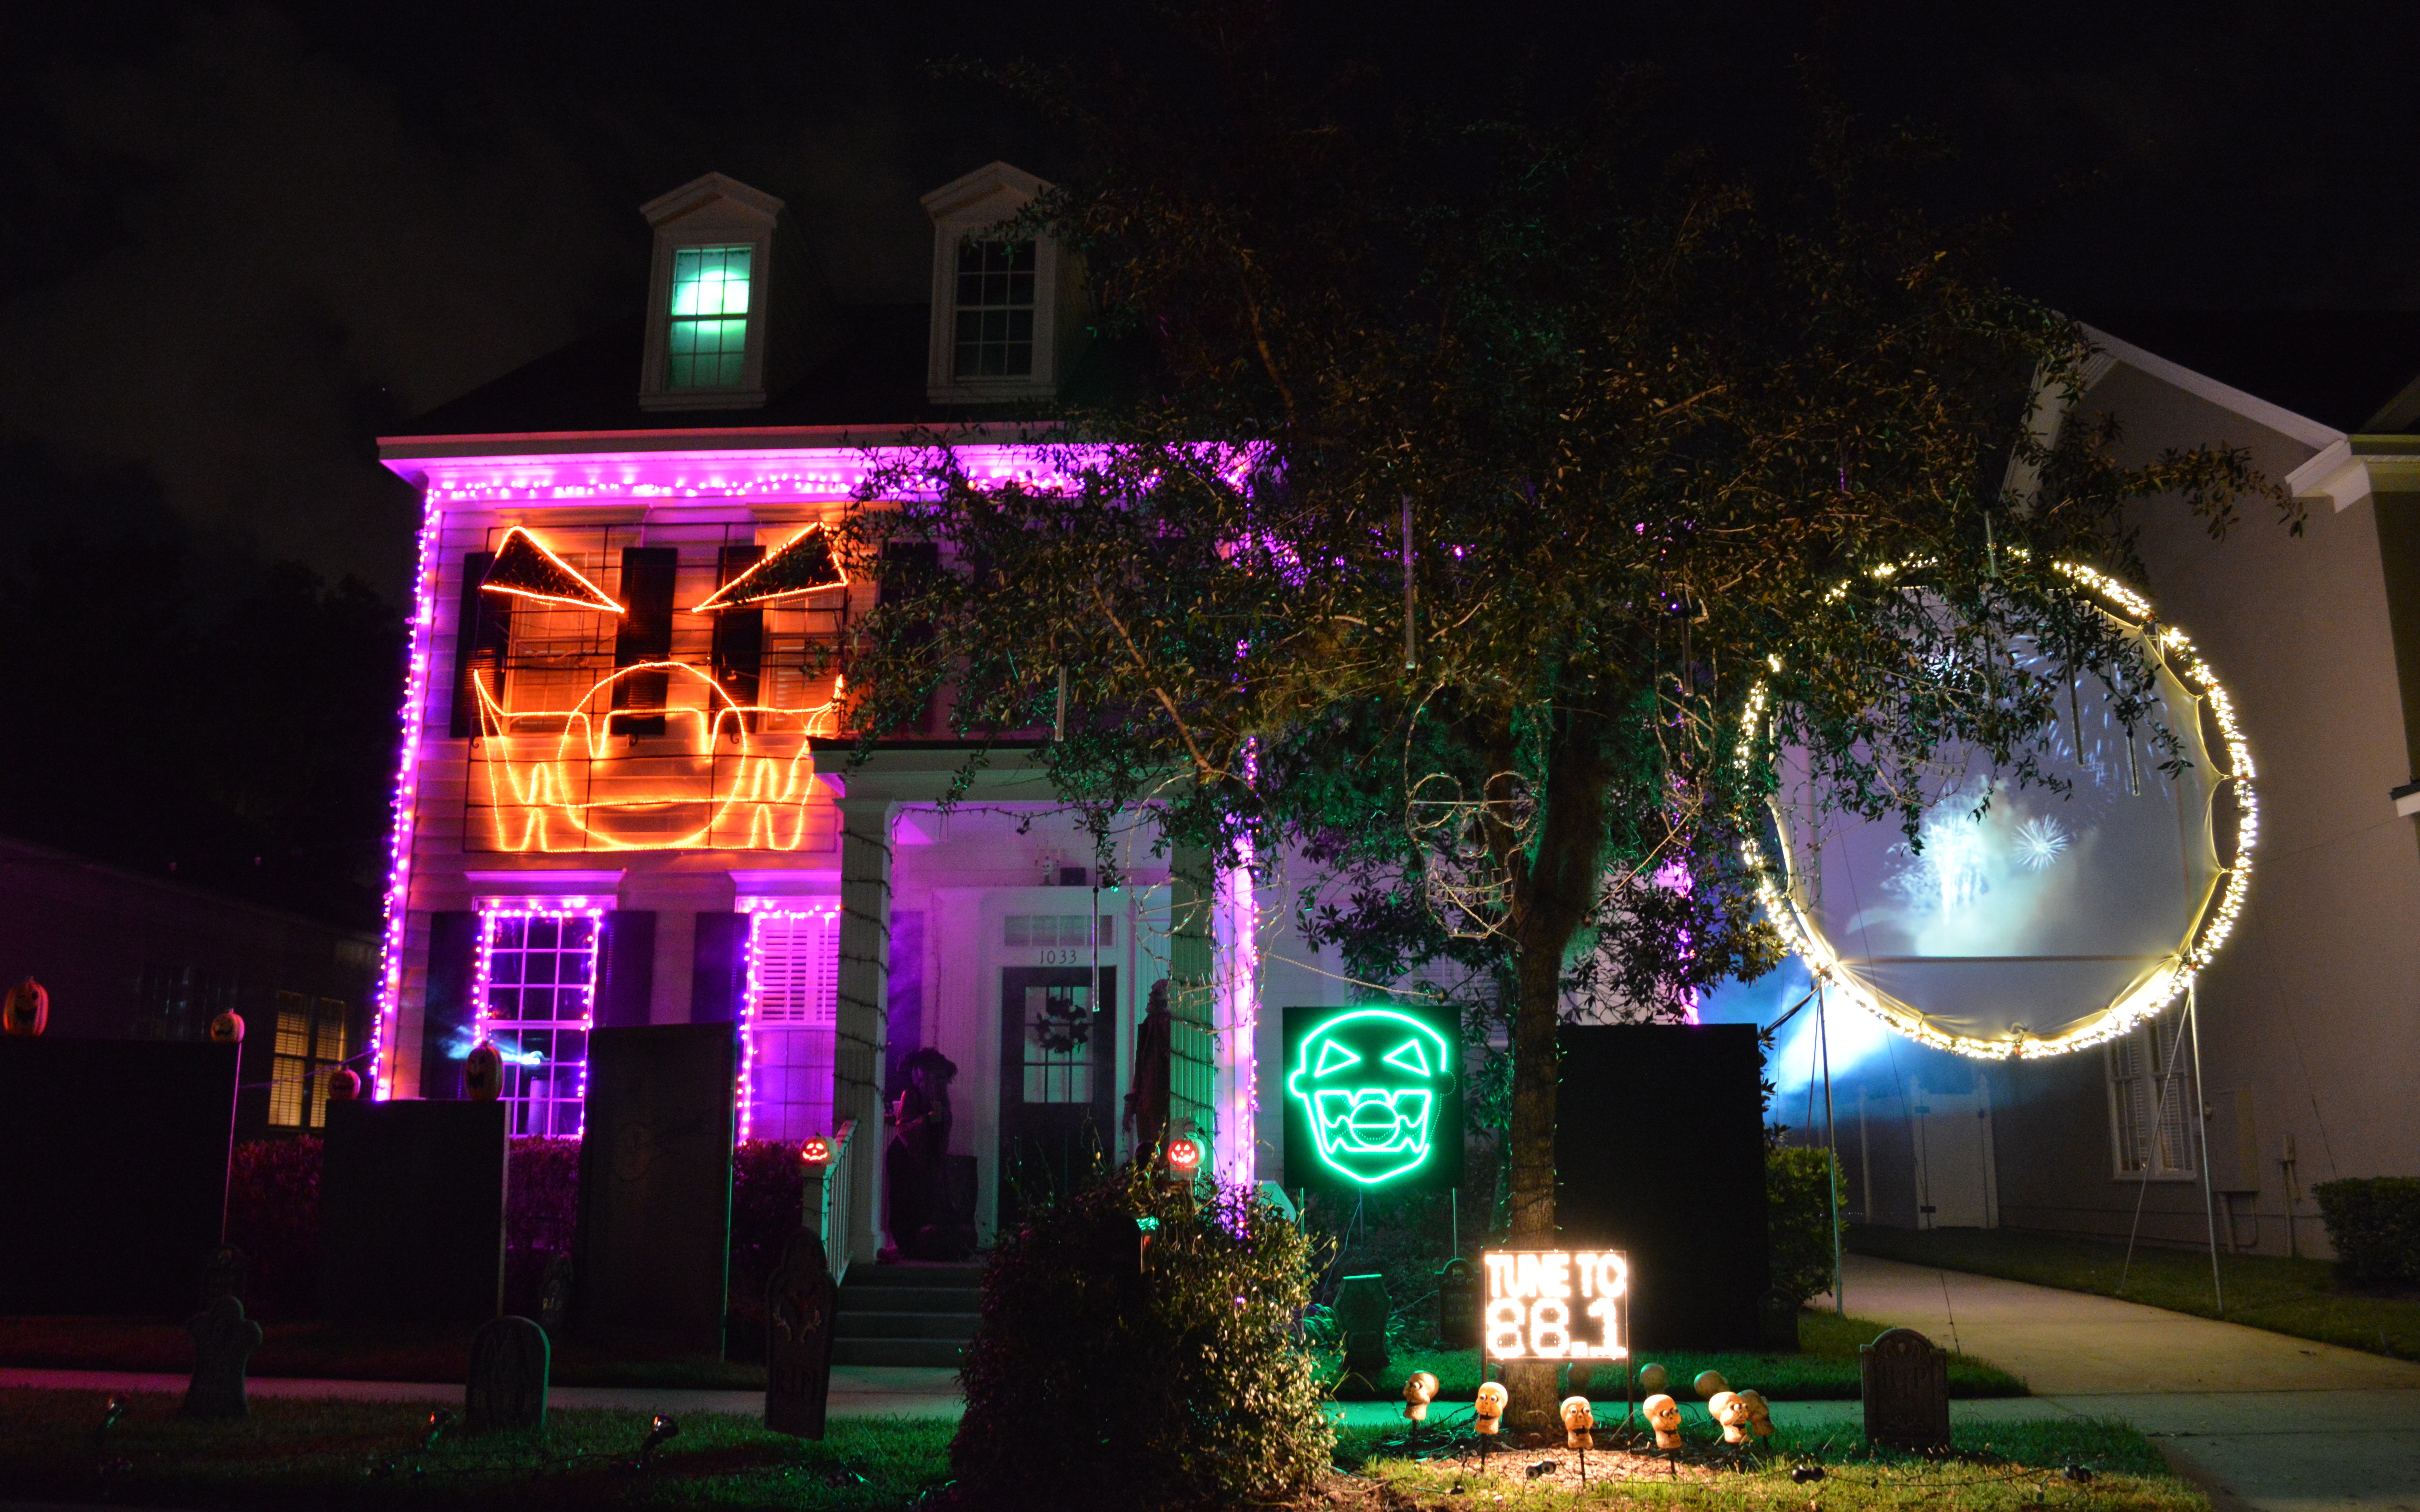 Halloween show house ~ check out the video  http://www.youtube.com/watch?v=r_nj-P7c5bU&list=HL1350613494&feature=mh_lolz